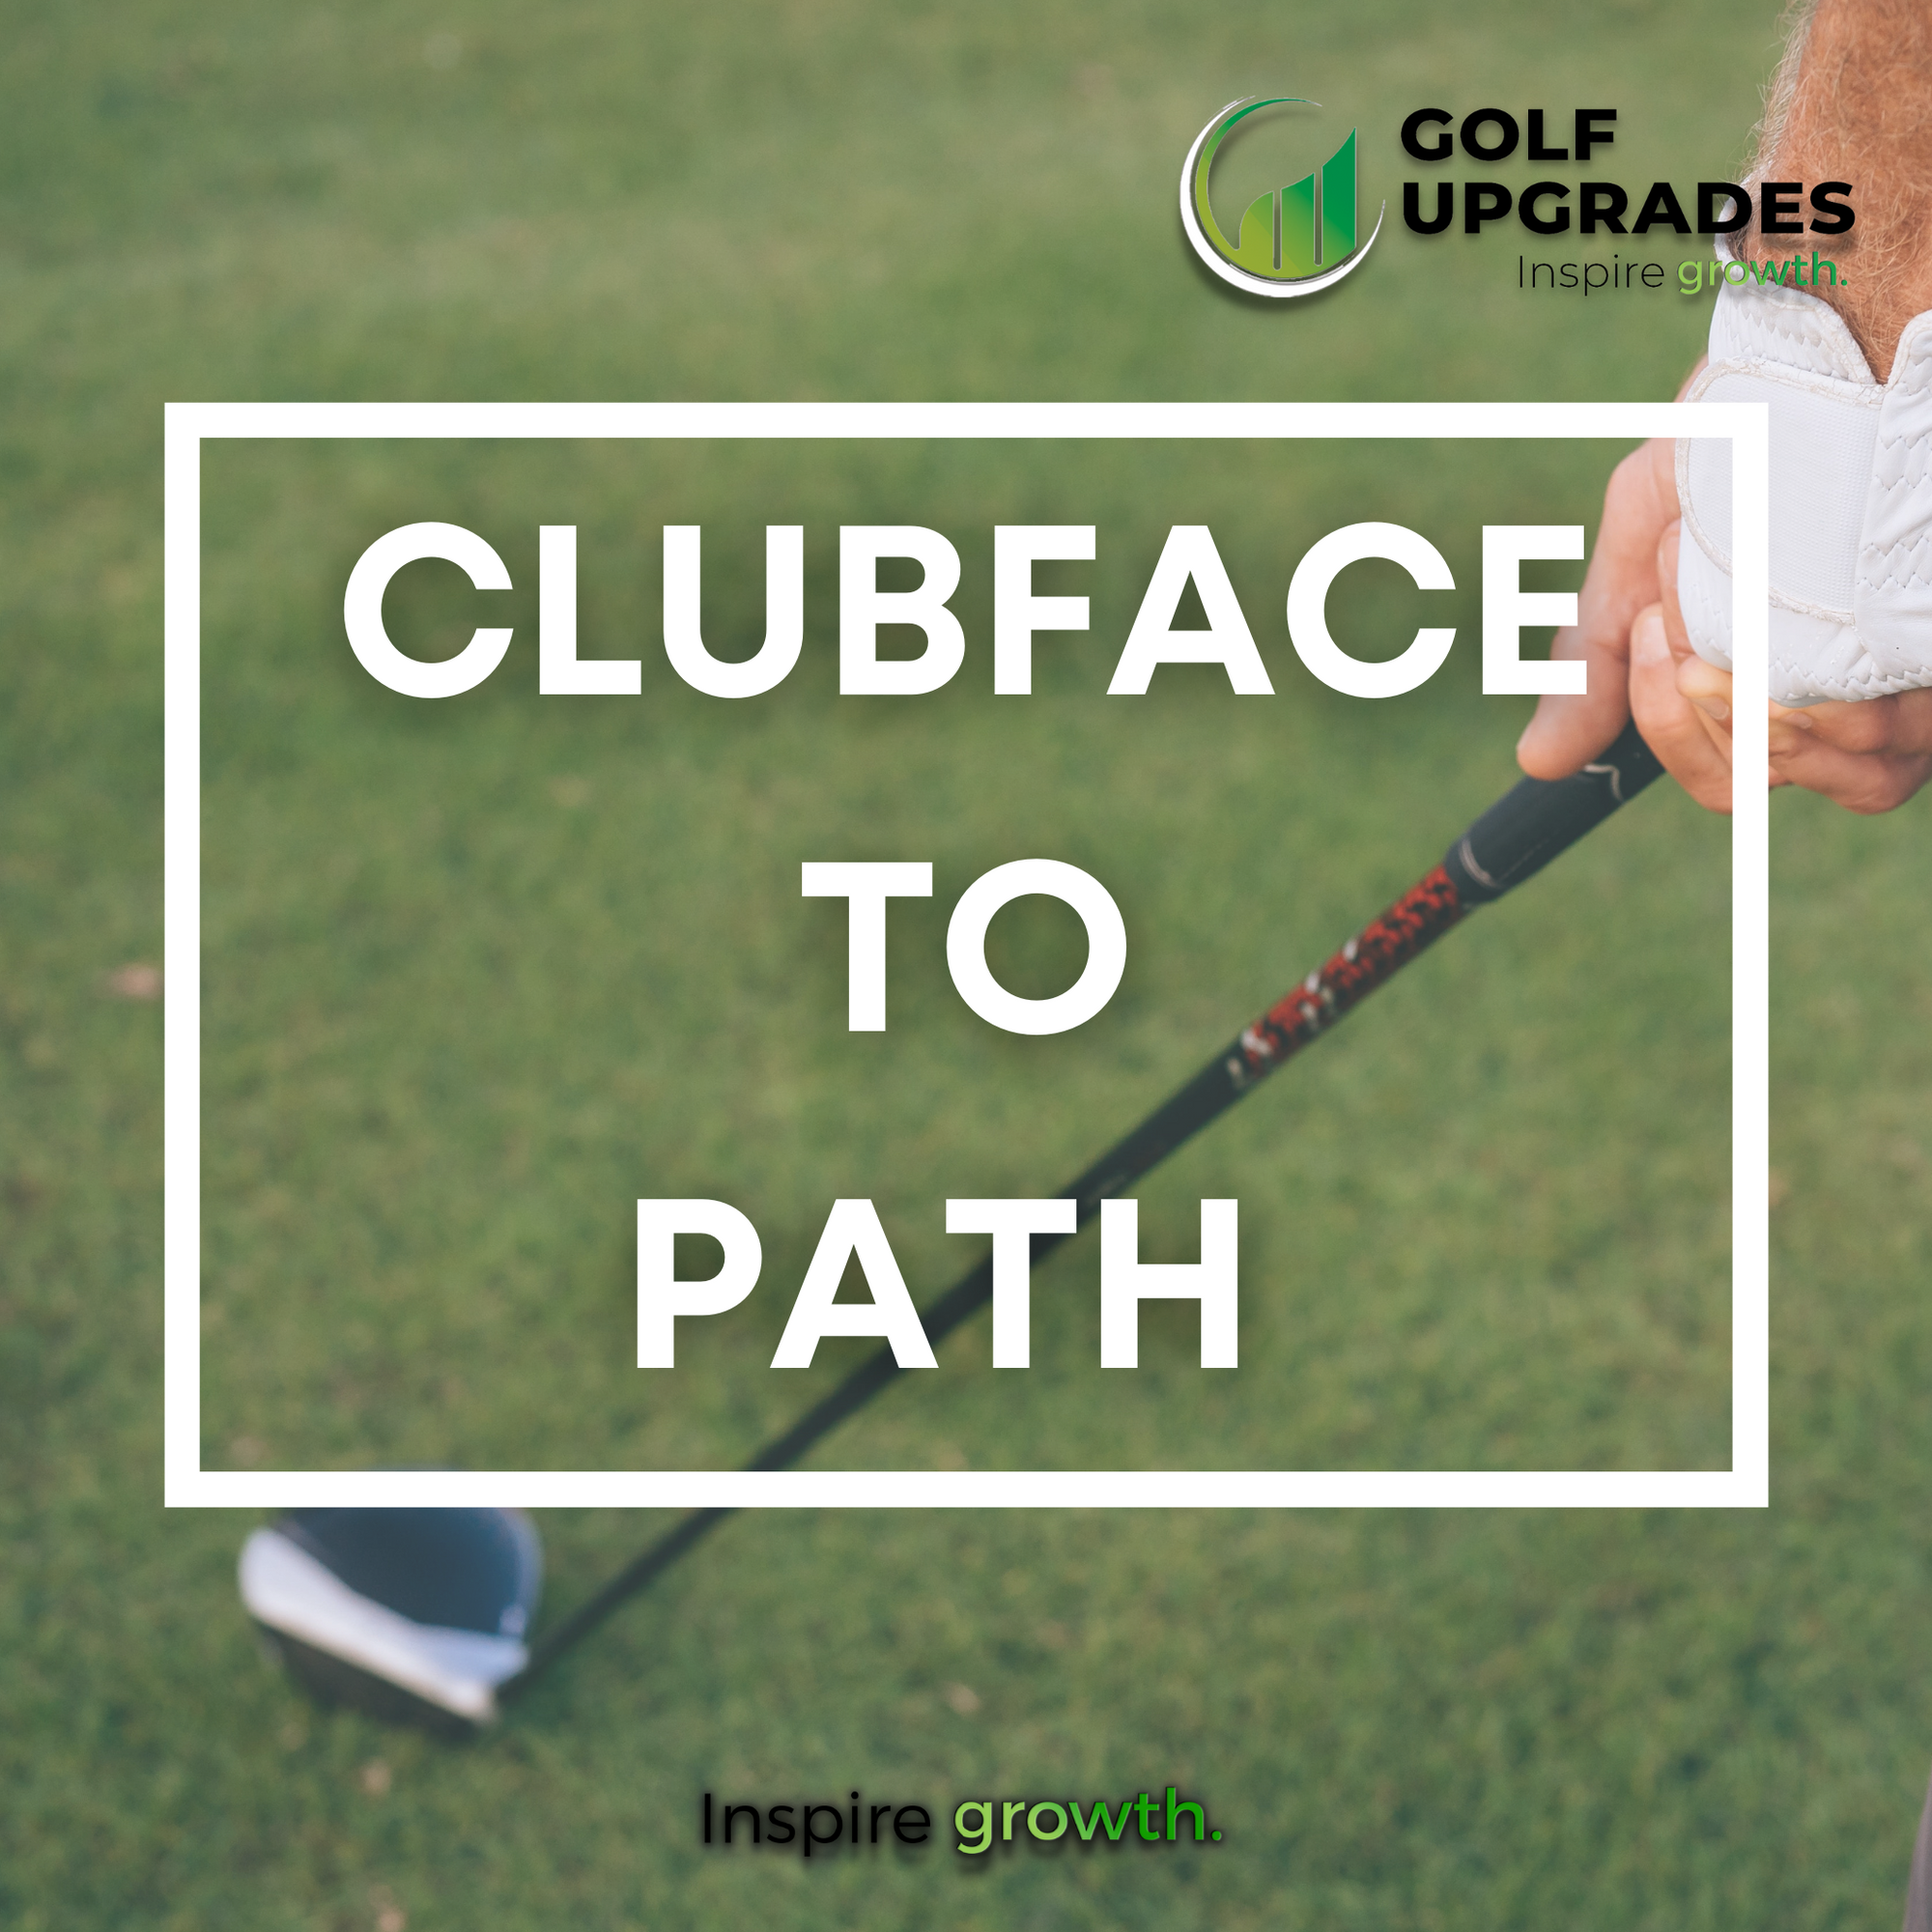 Clubface Angle & Clubface to Path